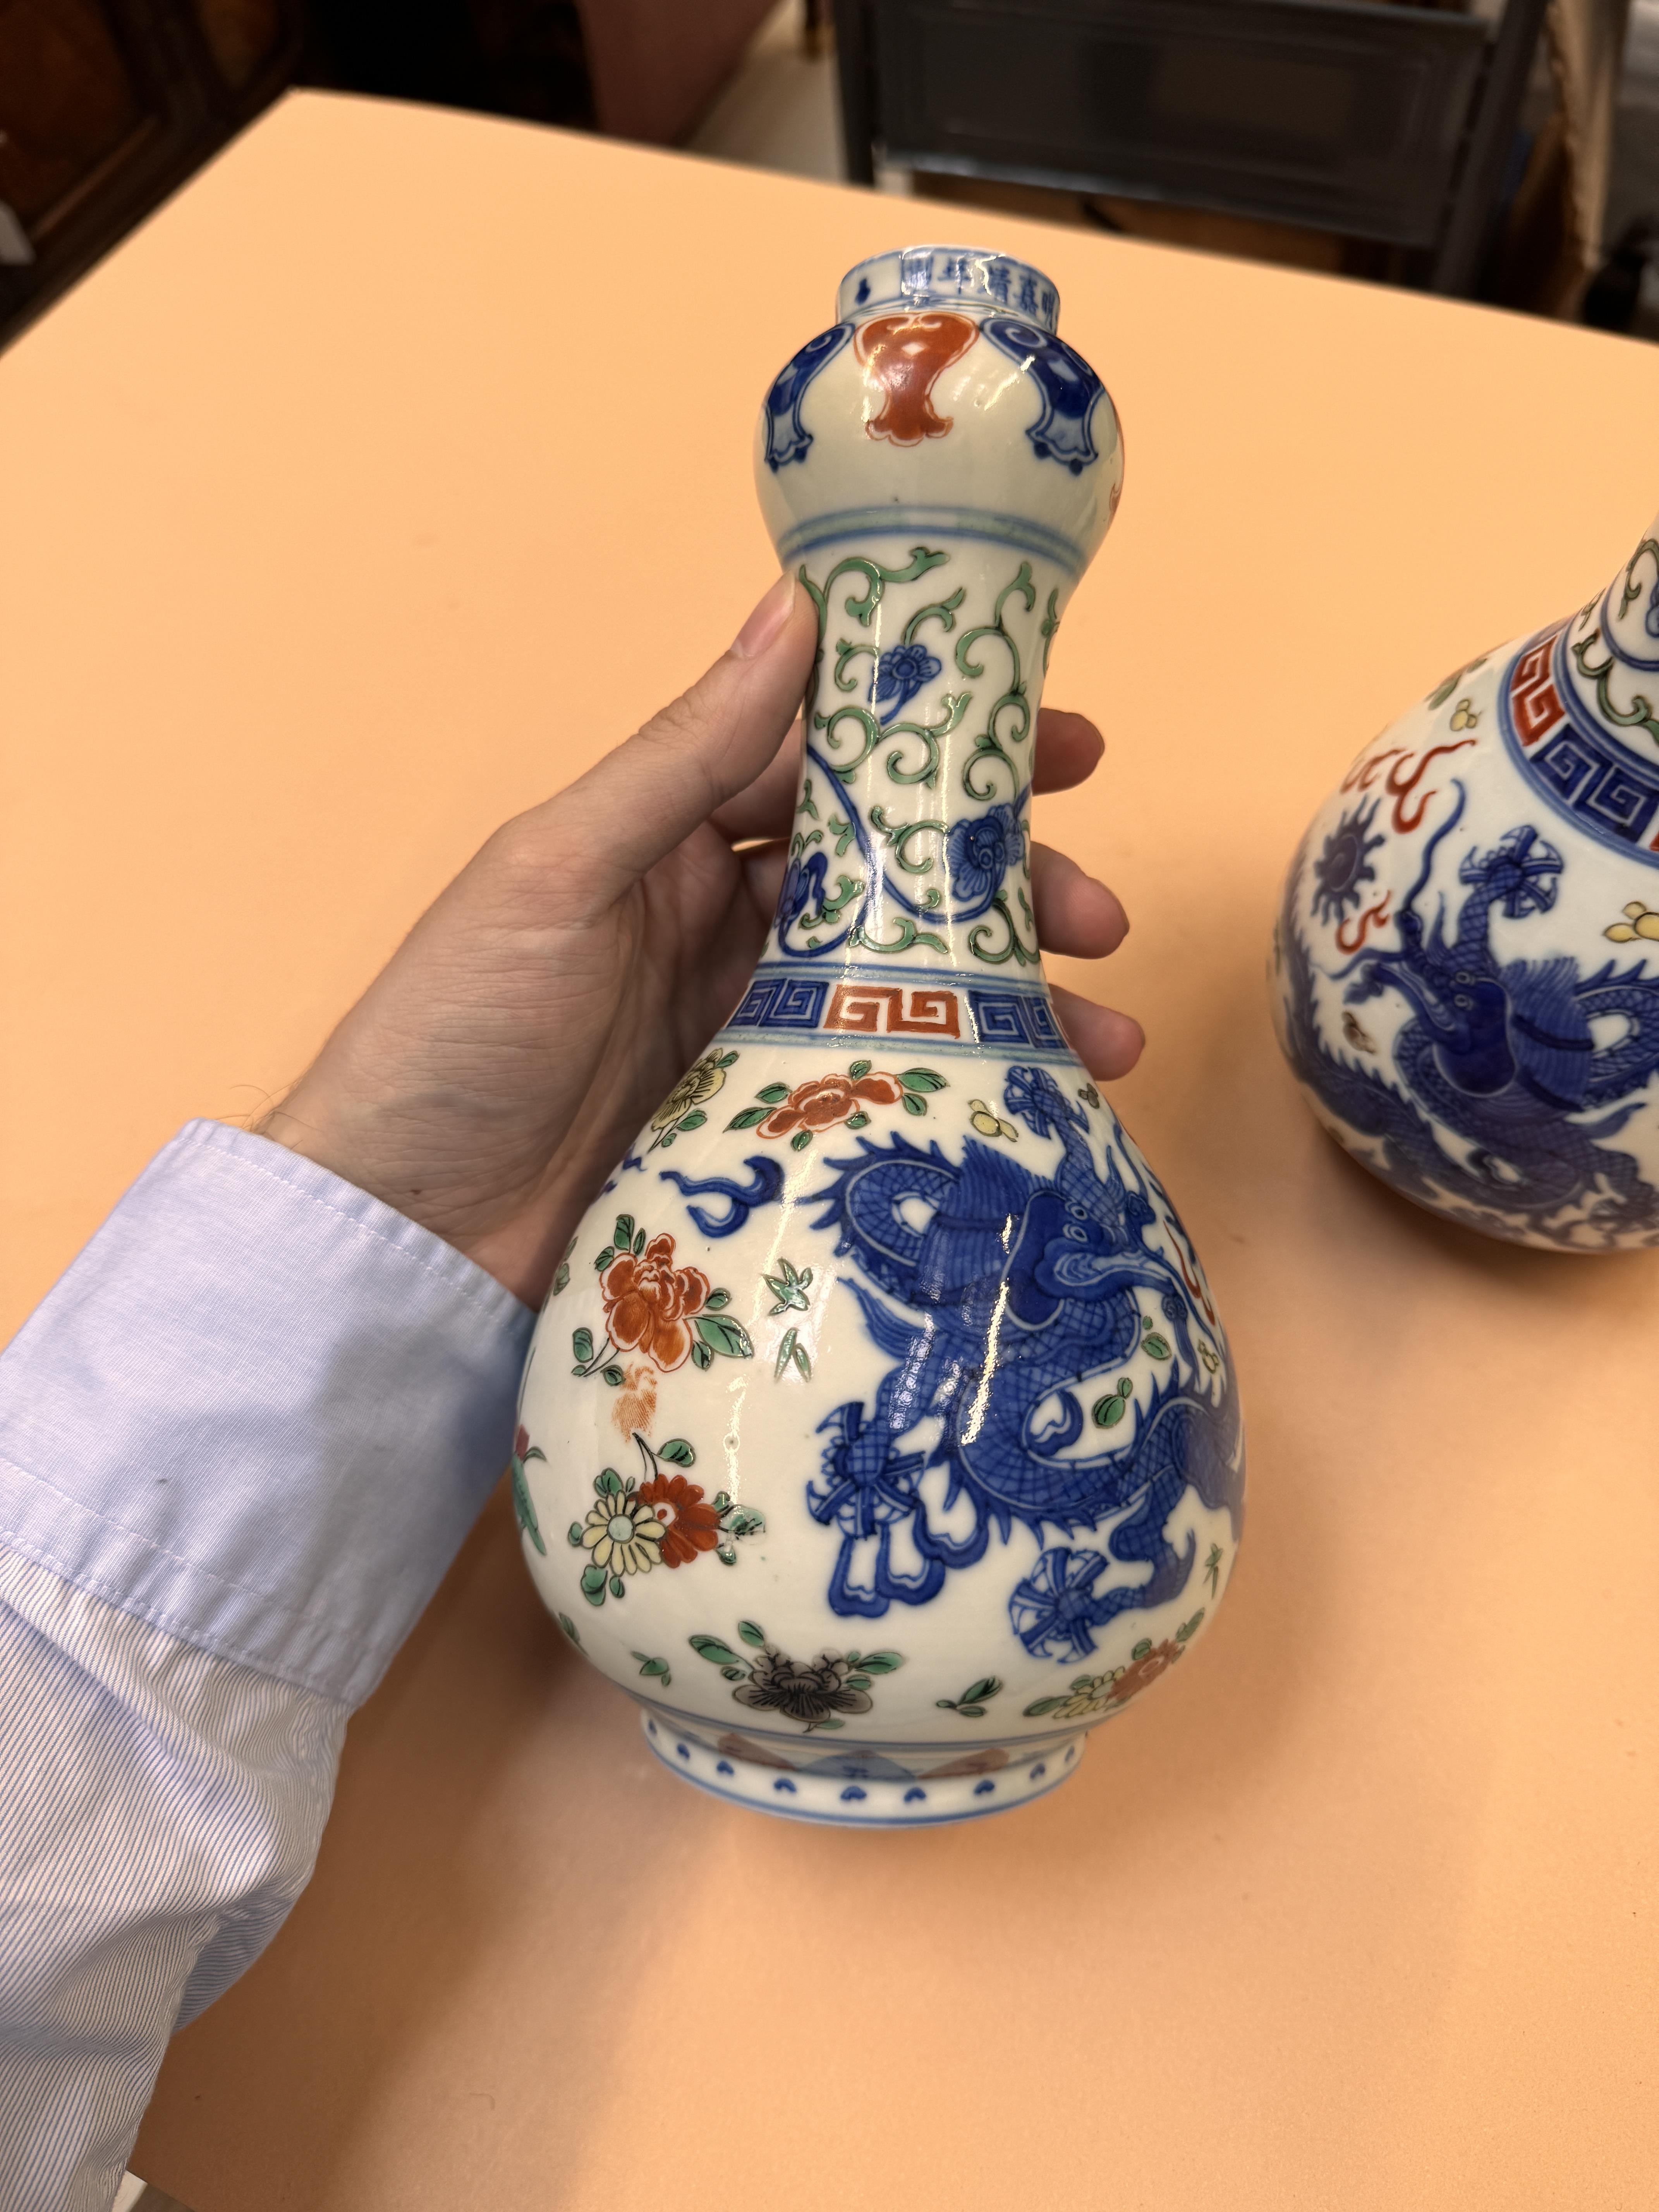 A PAIR OF CHINESE WUCAI 'DRAGON' VASES 民國時期 五彩龍趕珠紋瓶一對 《大明嘉靖年製》款 - Image 6 of 19